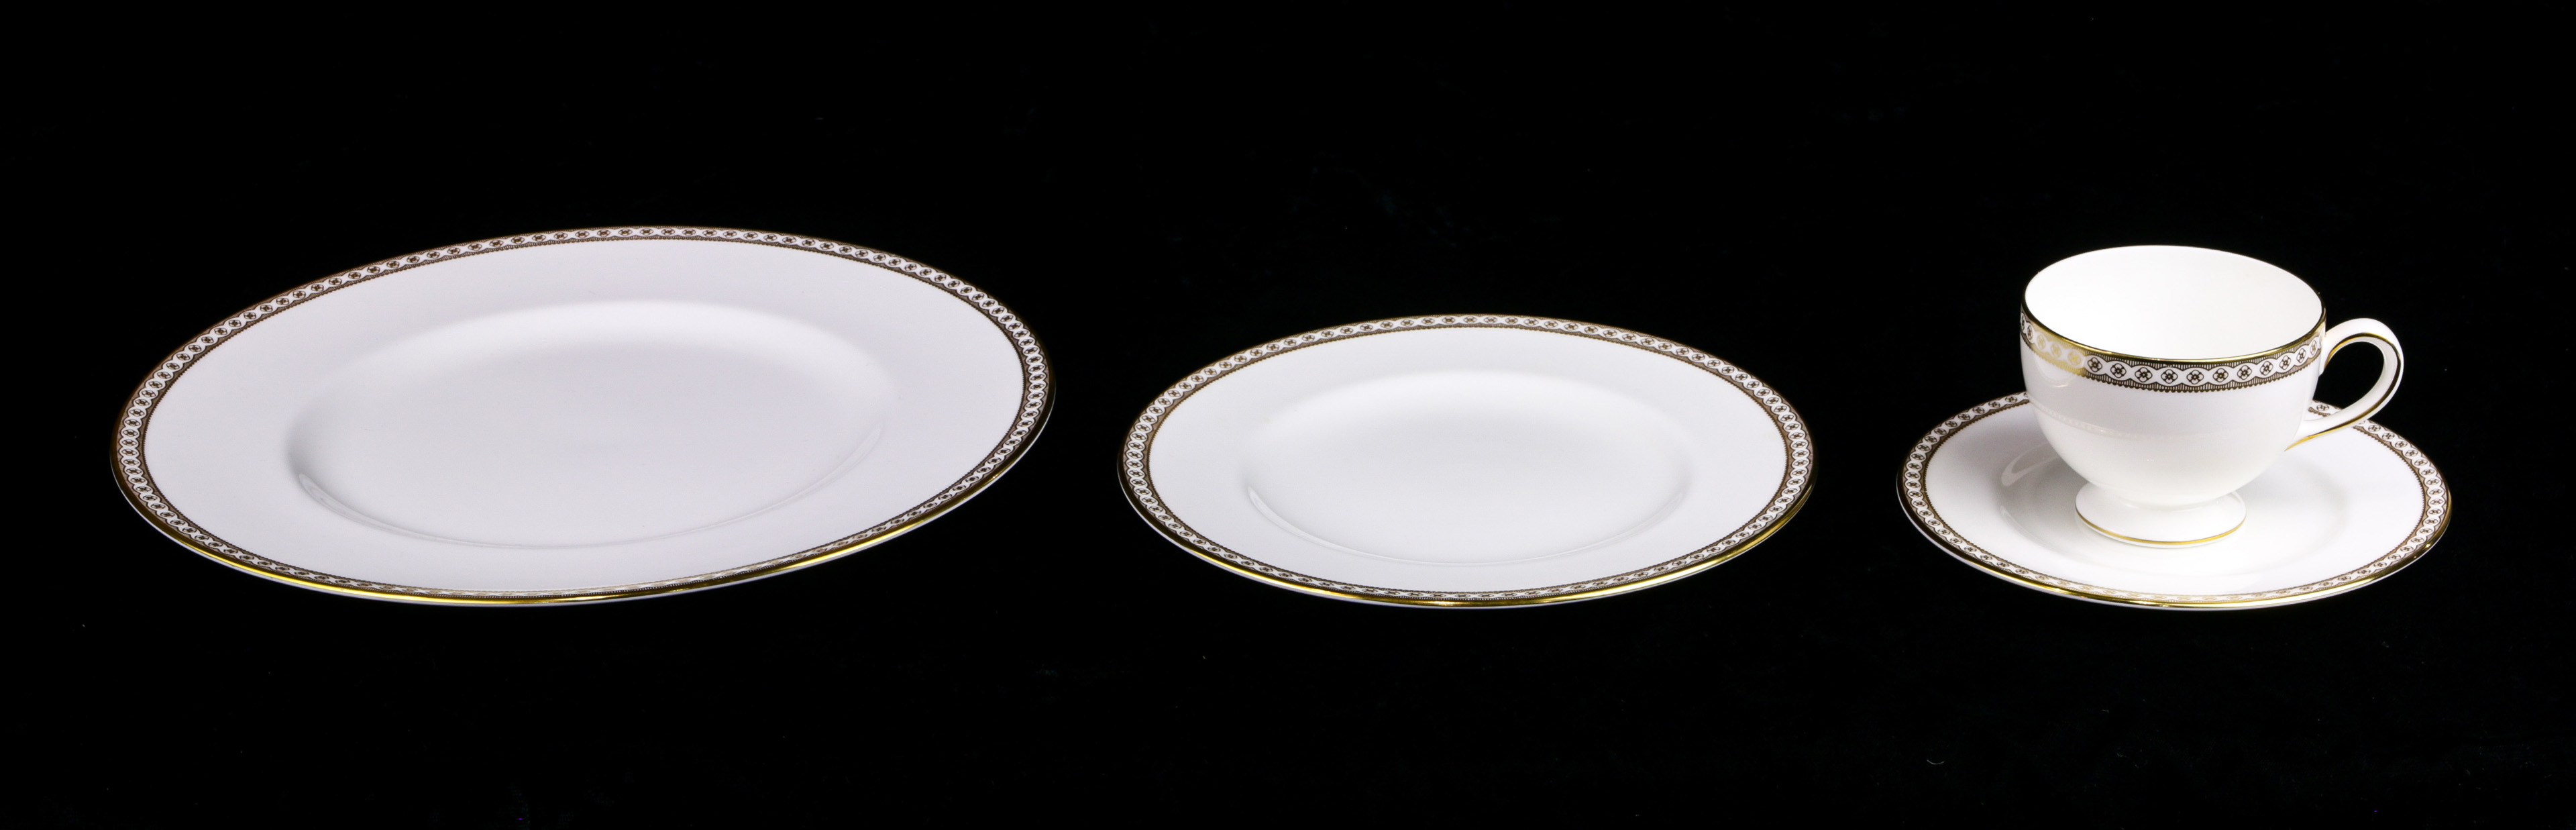 WEDGEWOOD TABLE SERVICE Wedgewood table